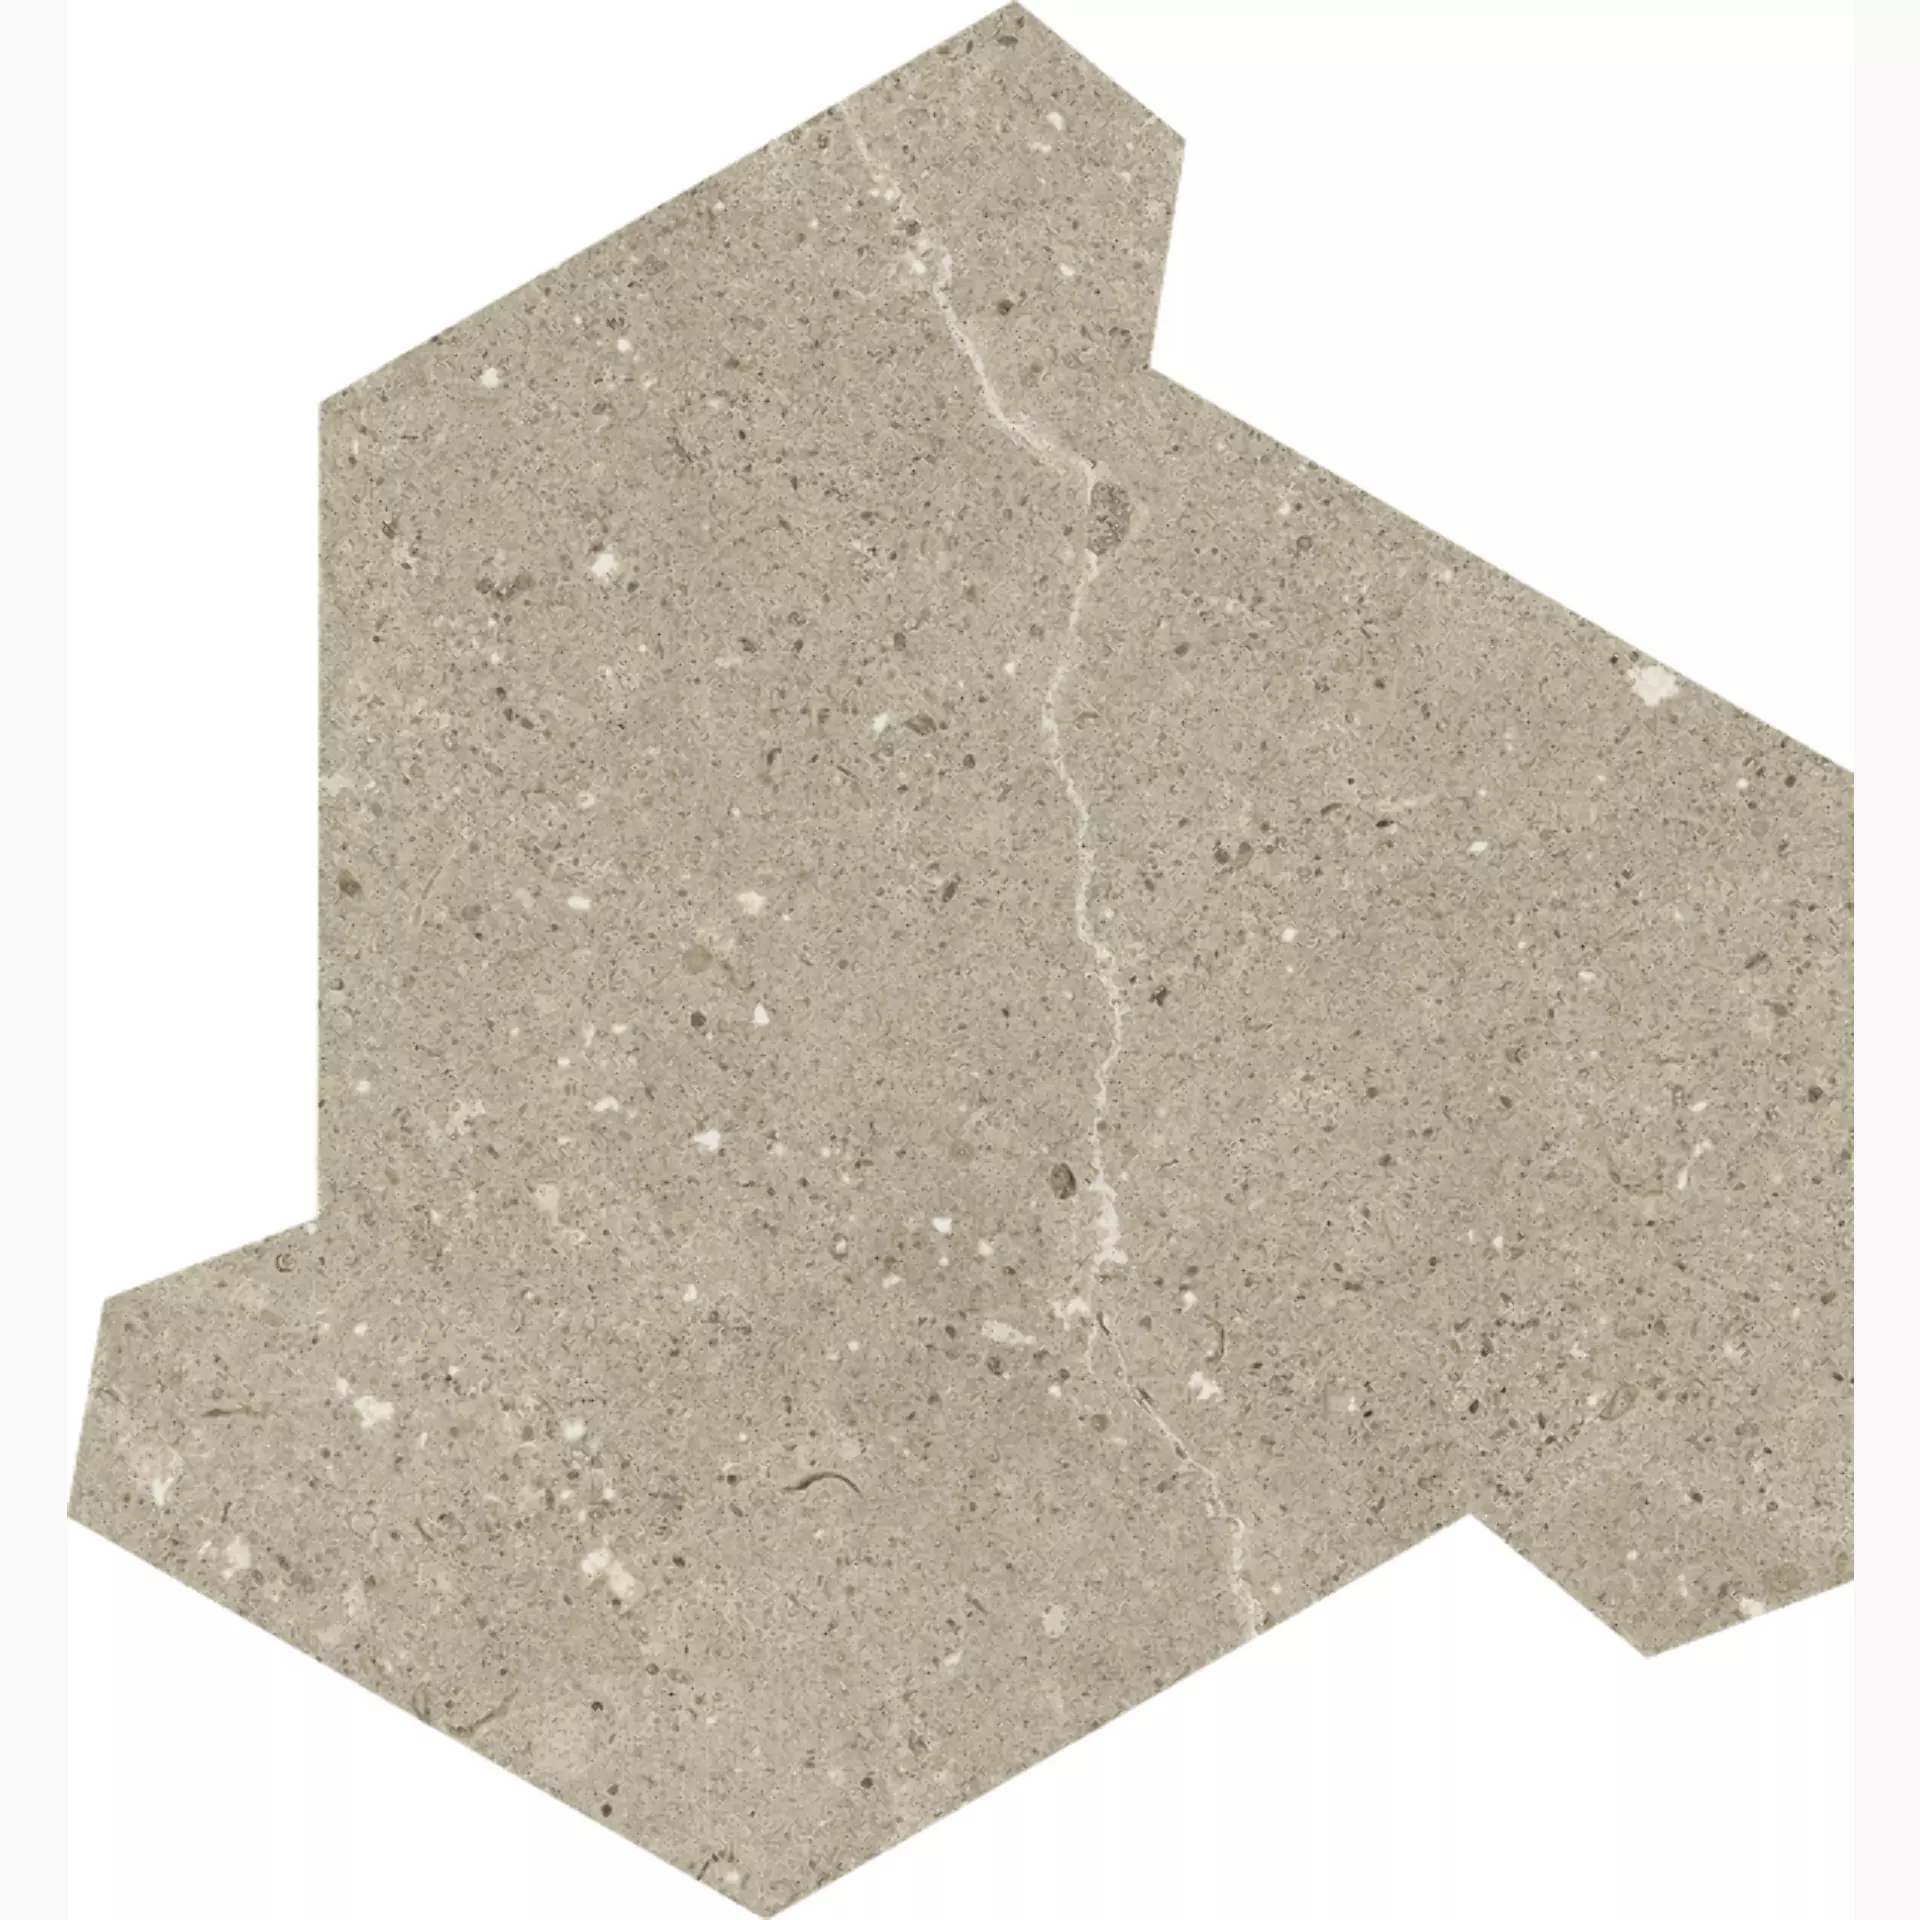 Del Conca Hwd Wild Greige Hwd Naturale Decor Stars G3WD11ST 30x30cm rectified 8,5mm